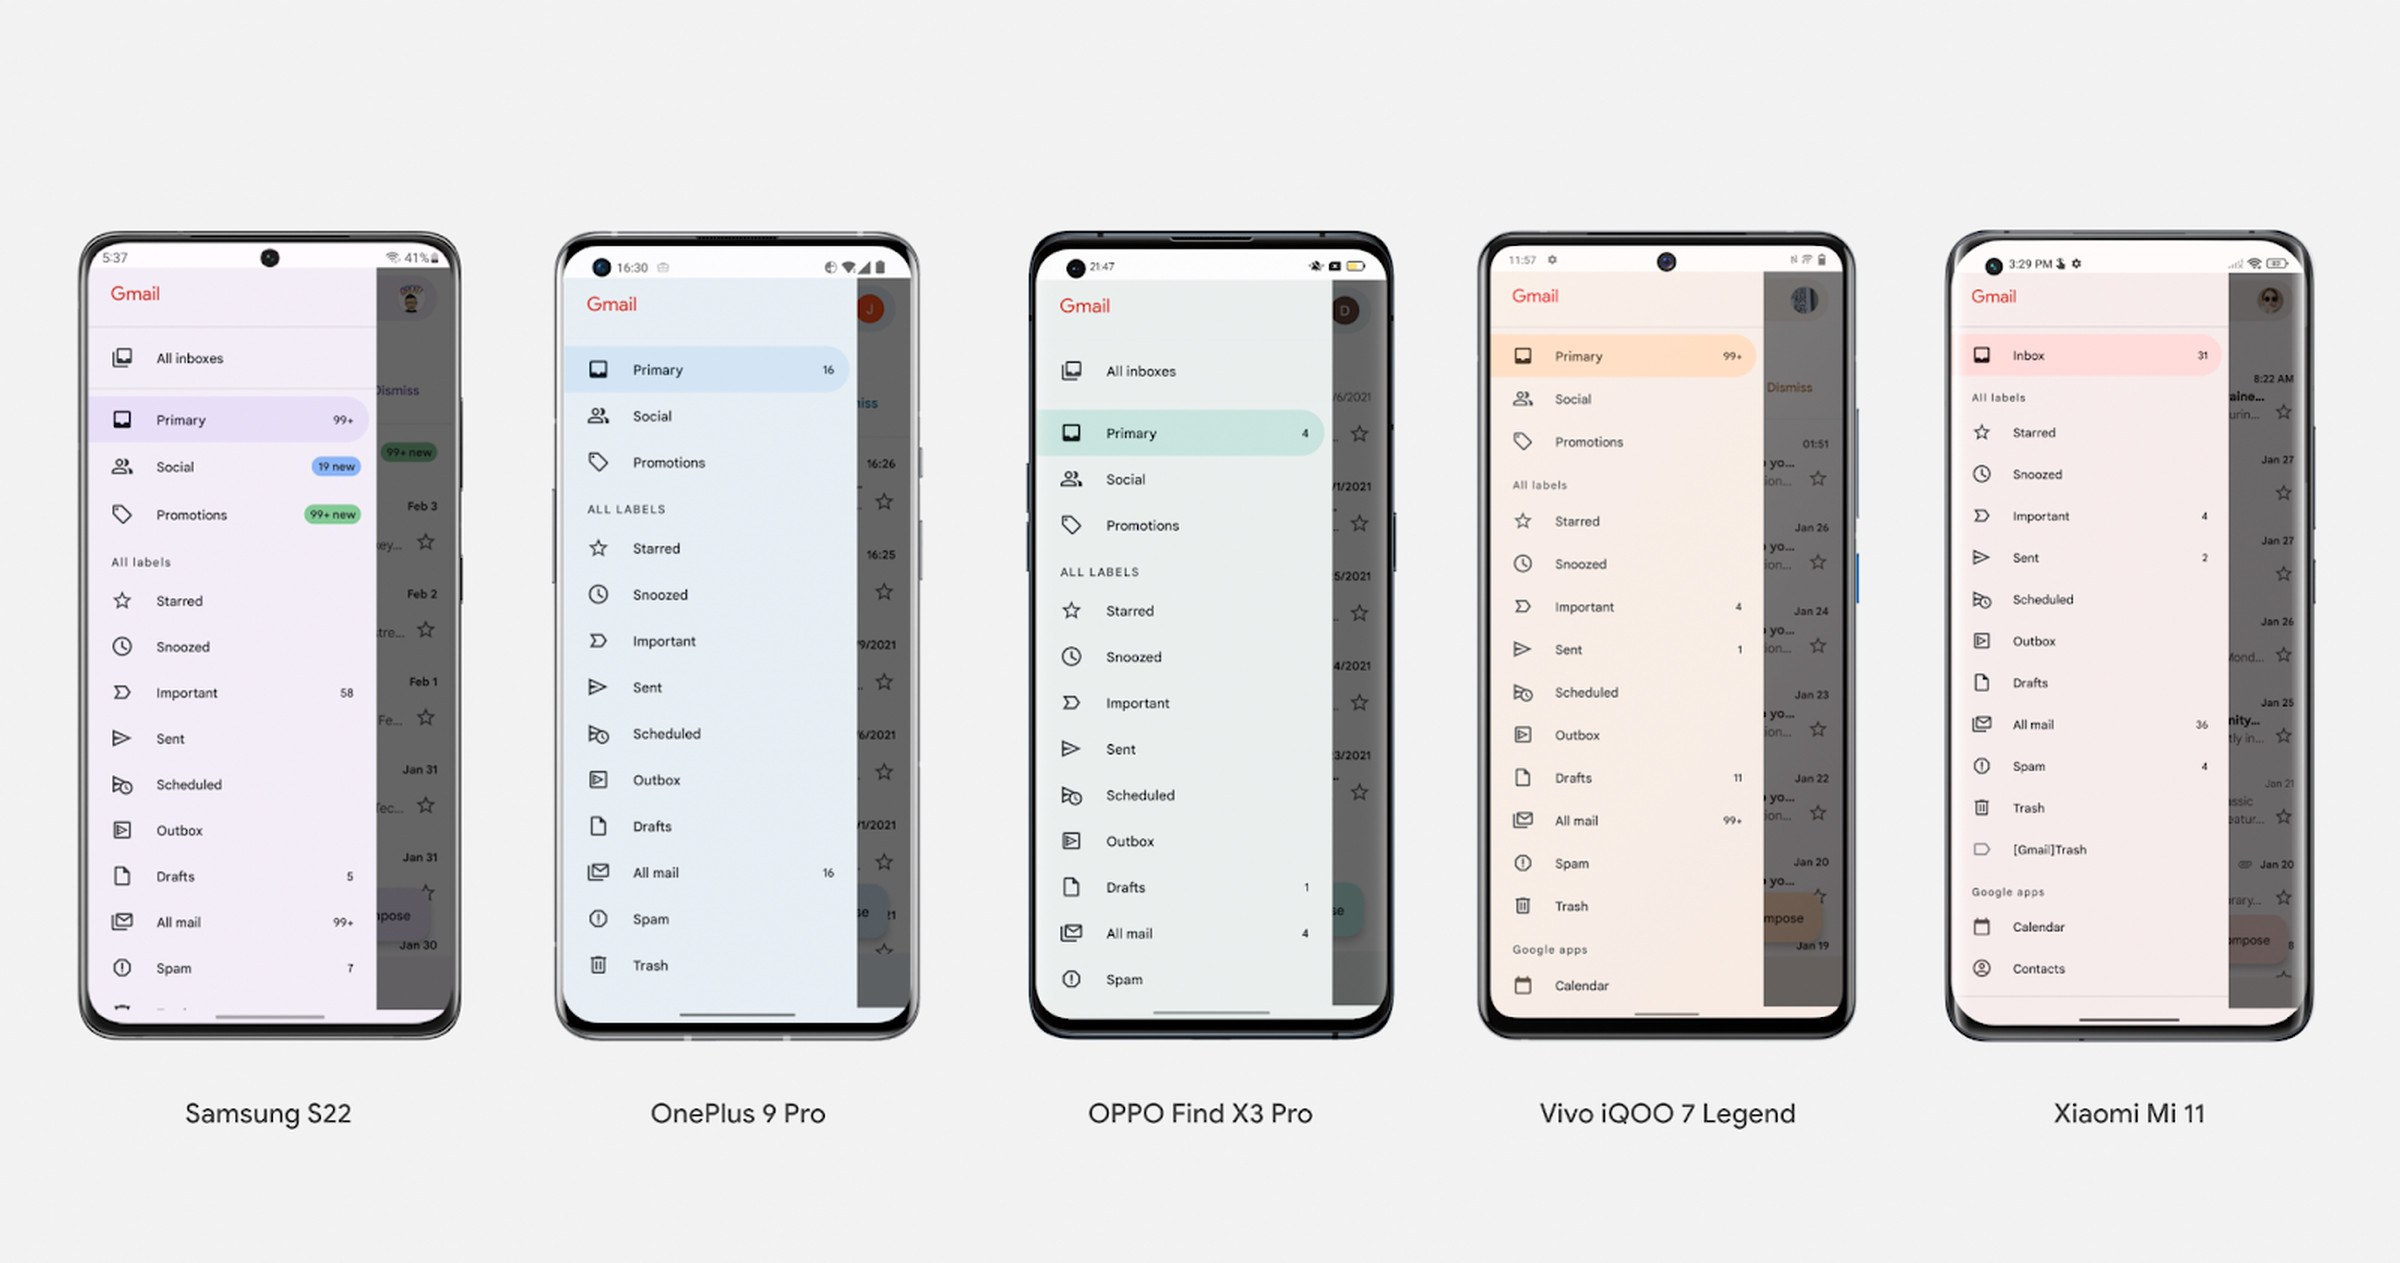 Here are some examples of how the color themes will appear on different phones.